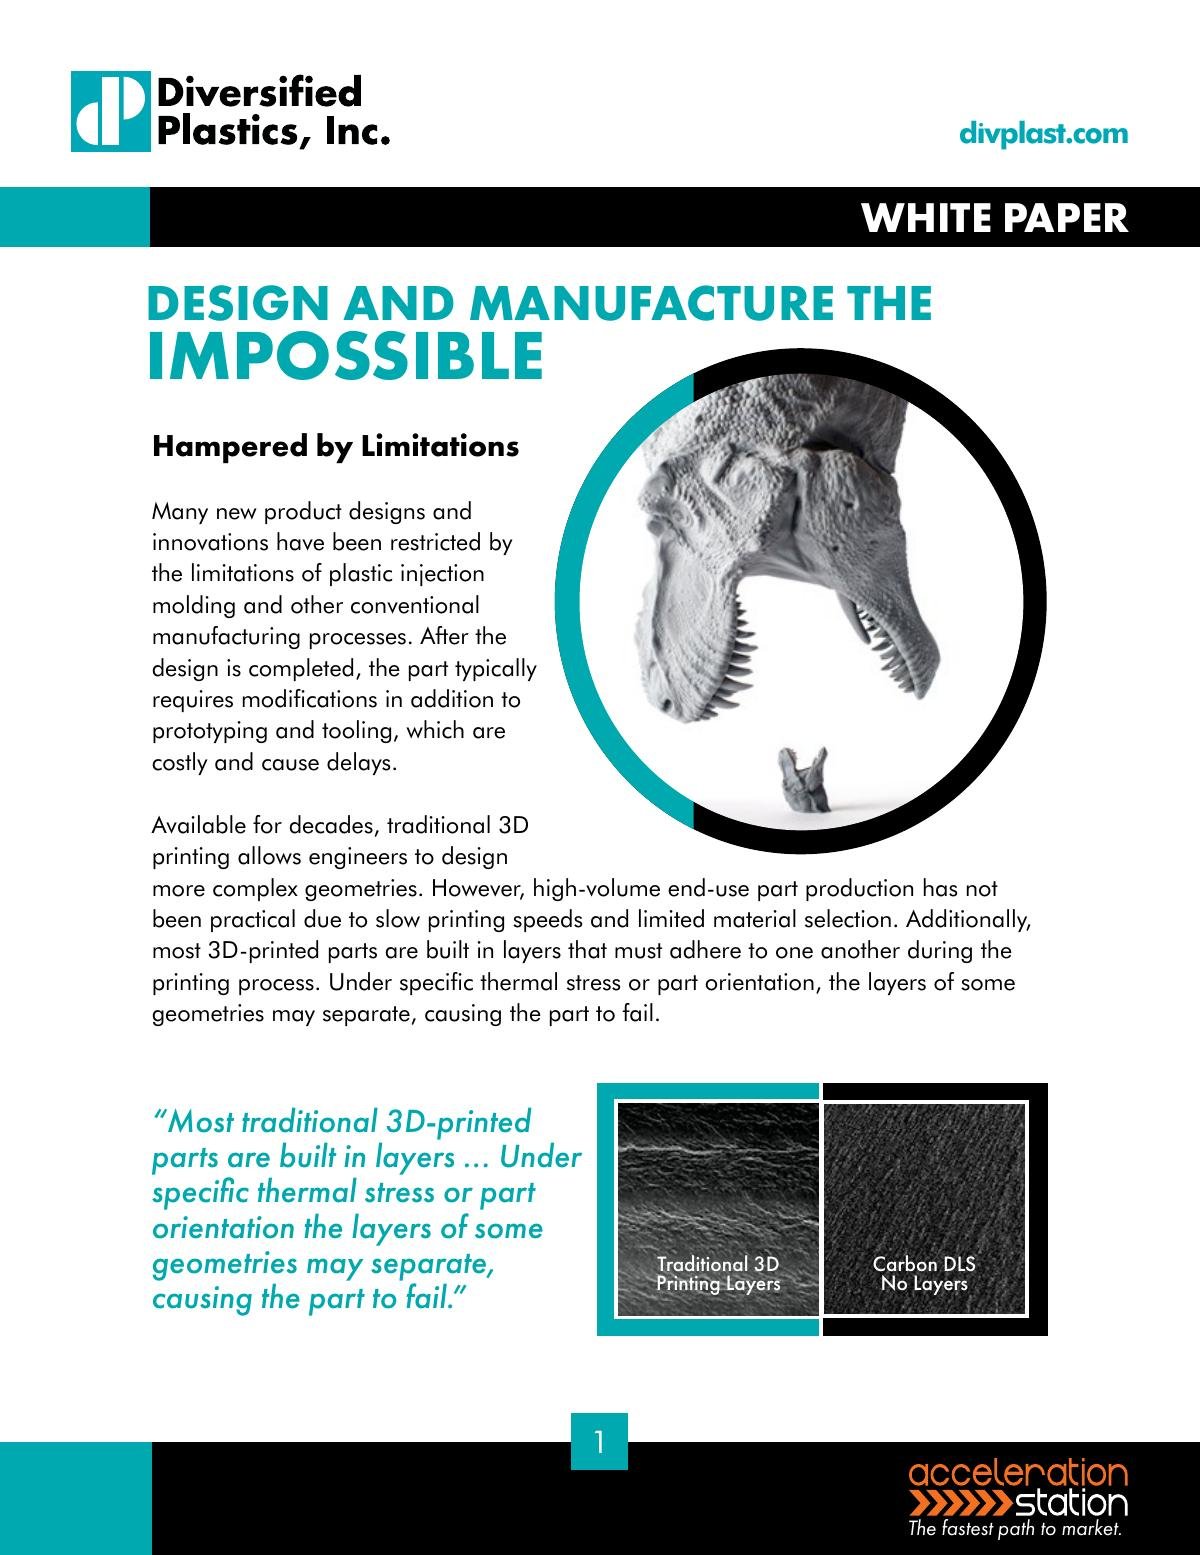 Design and Manufacture the Impossible